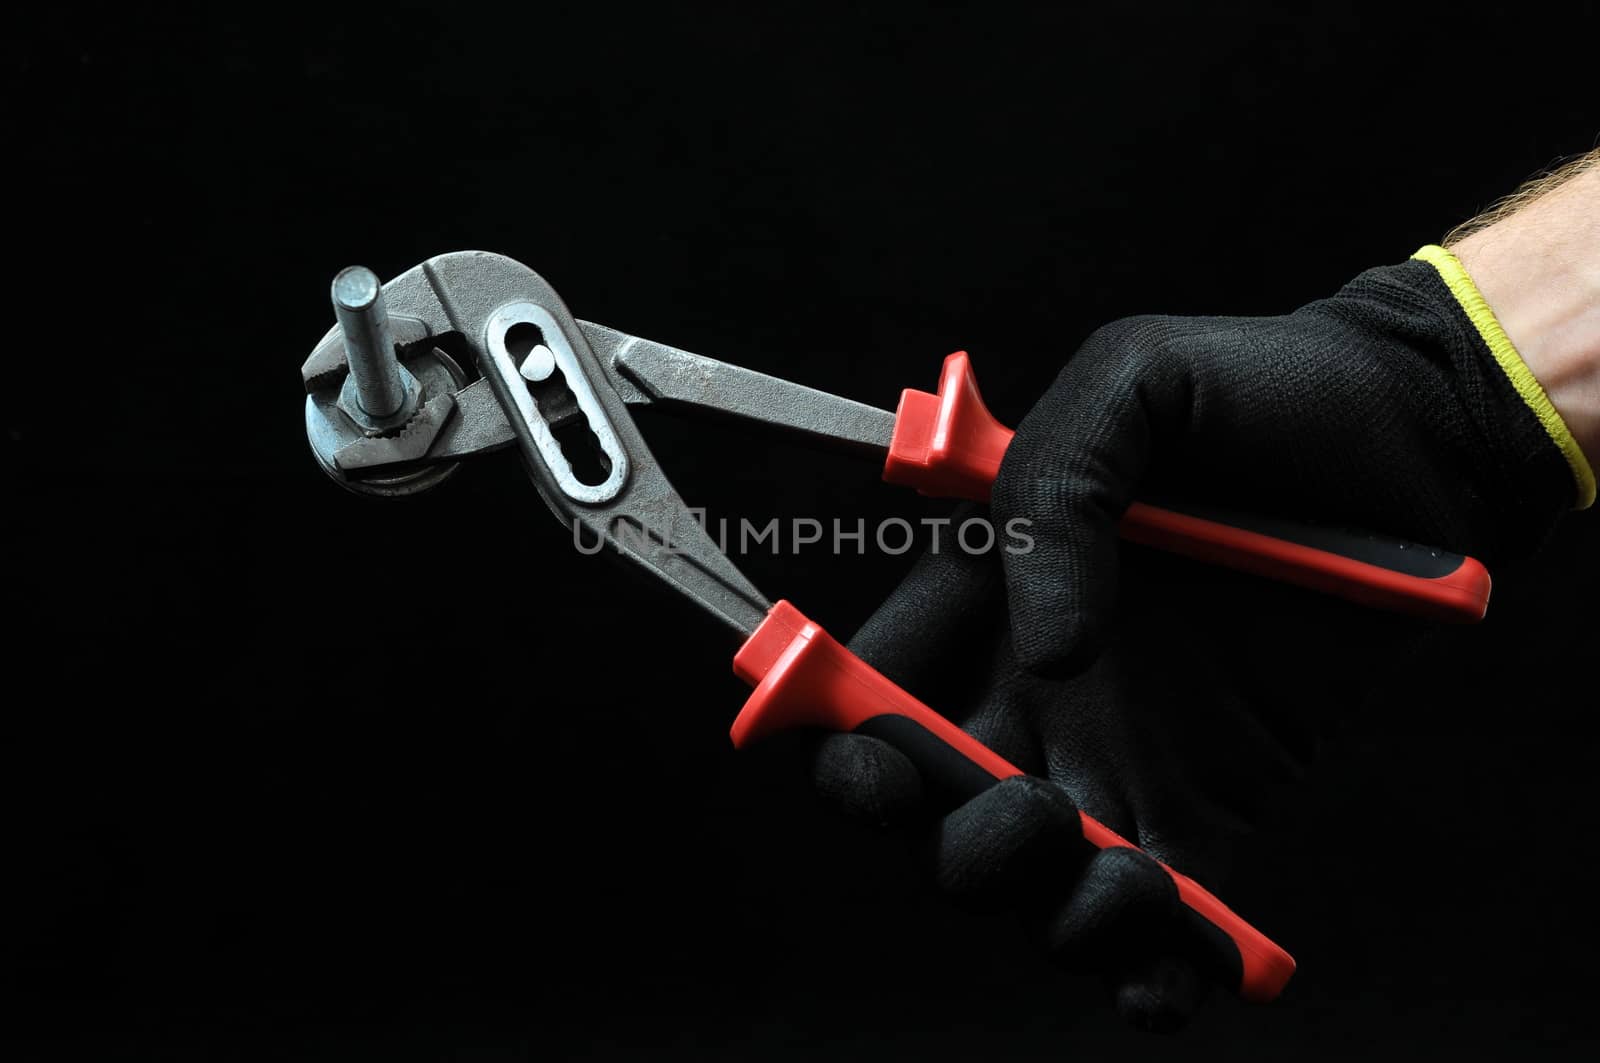 Pliers and a Hand on a Black Background